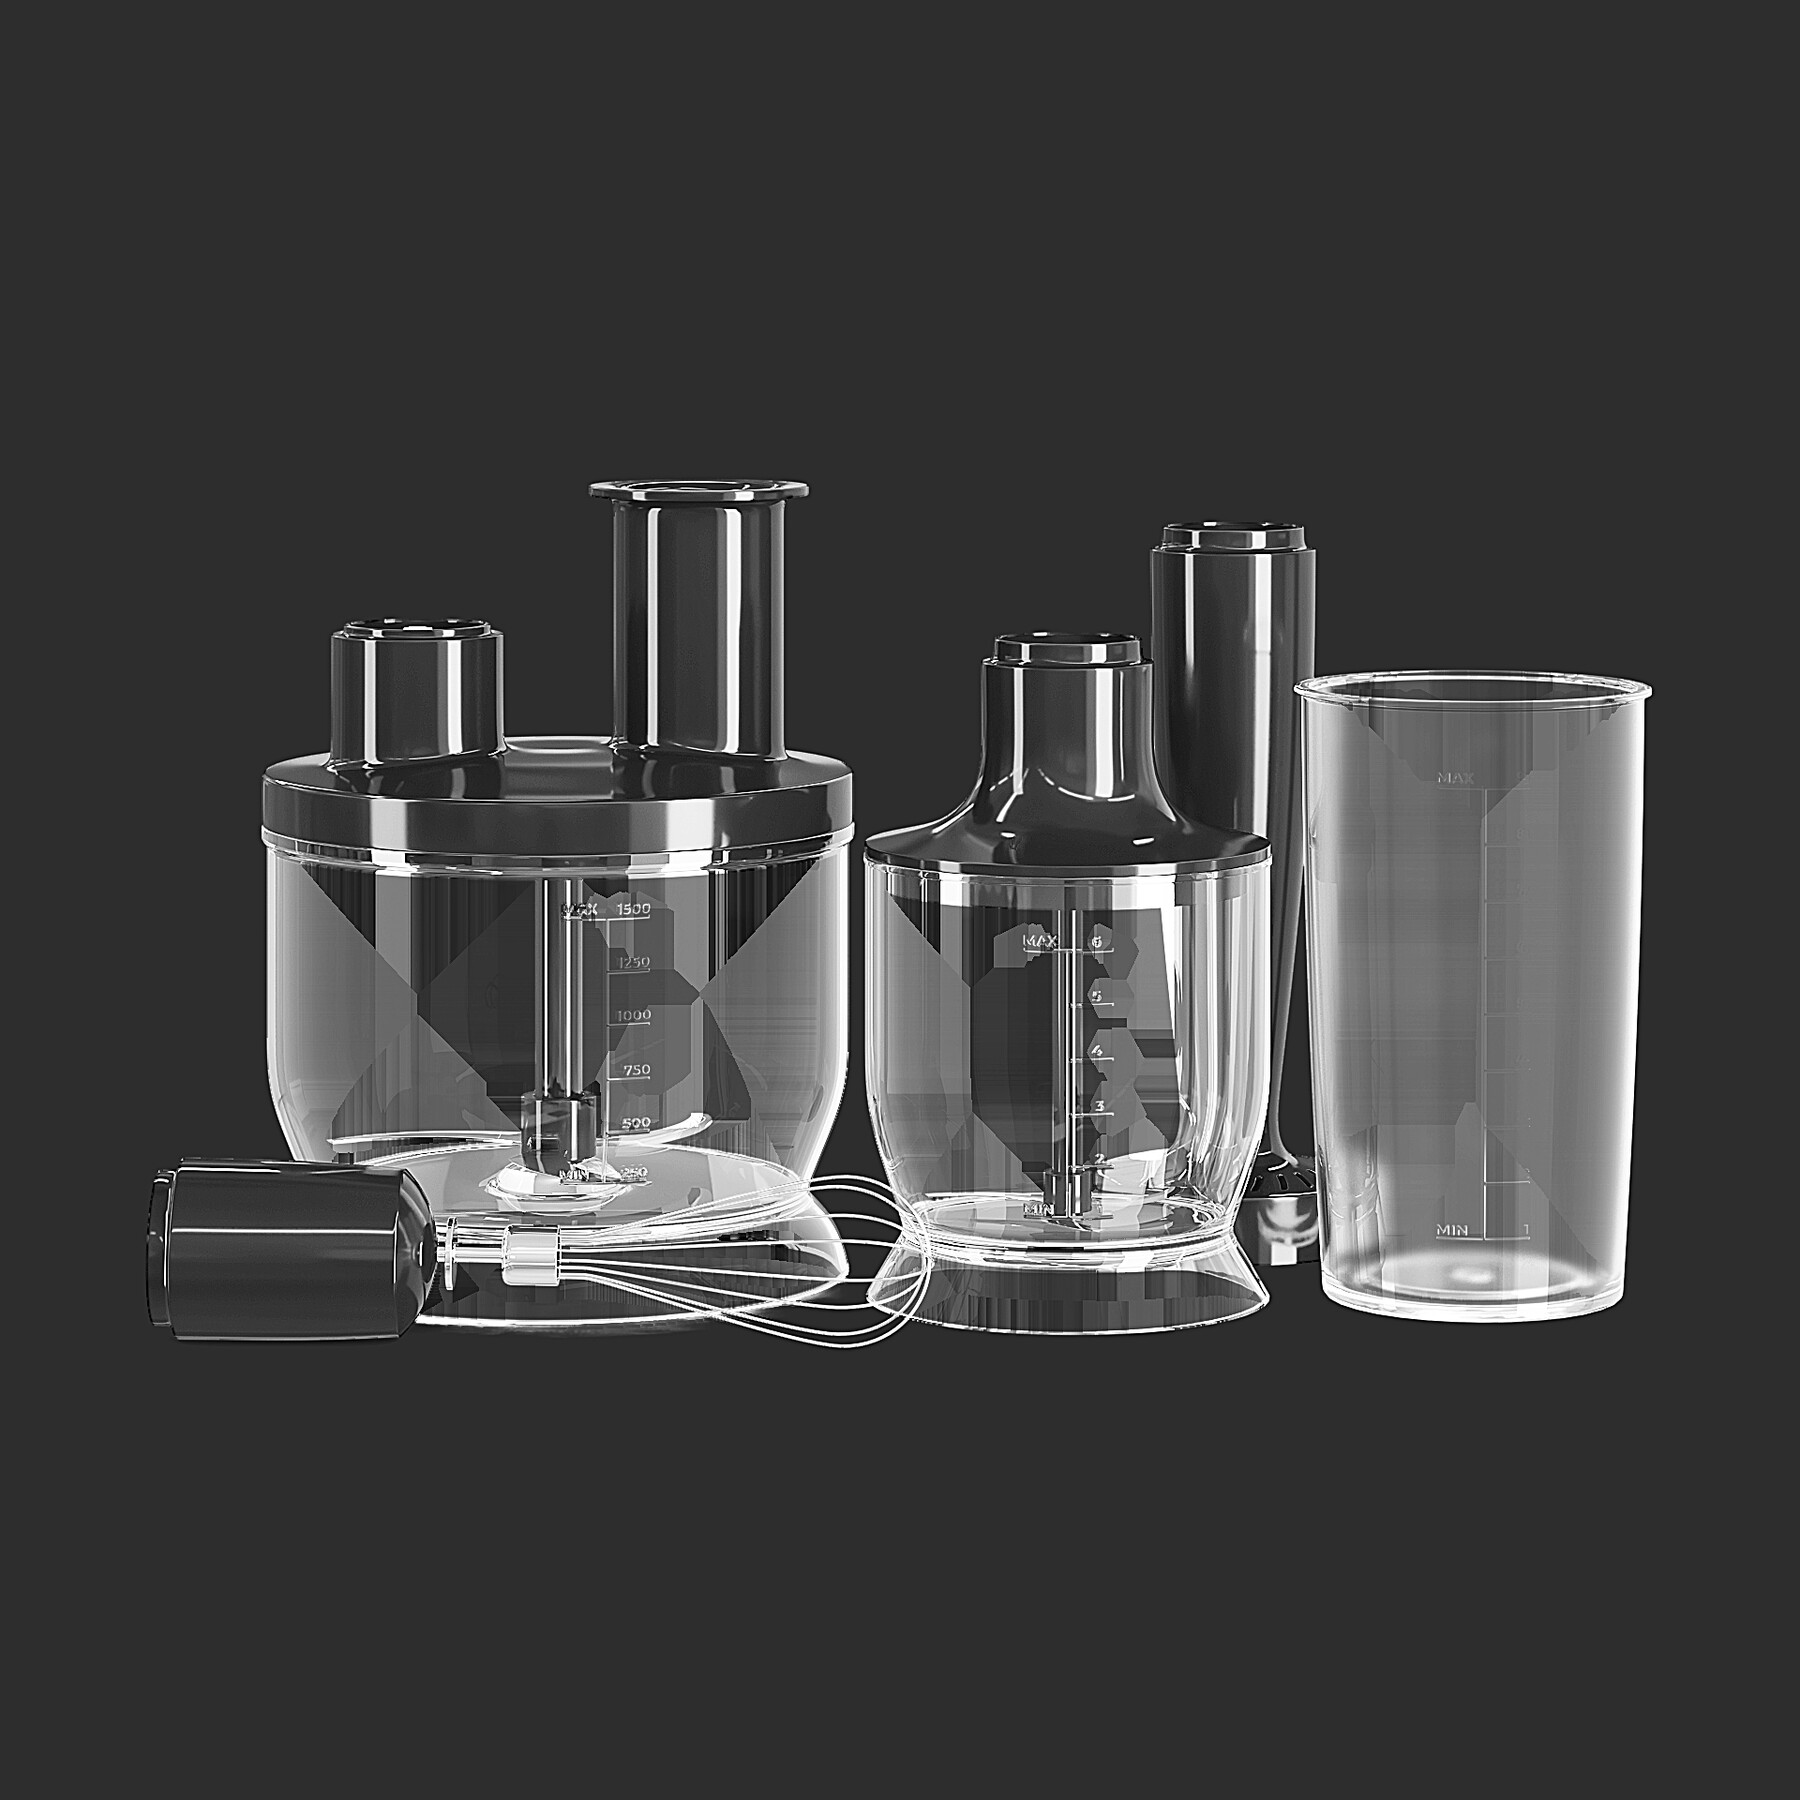 Blender accessories, Product accessories